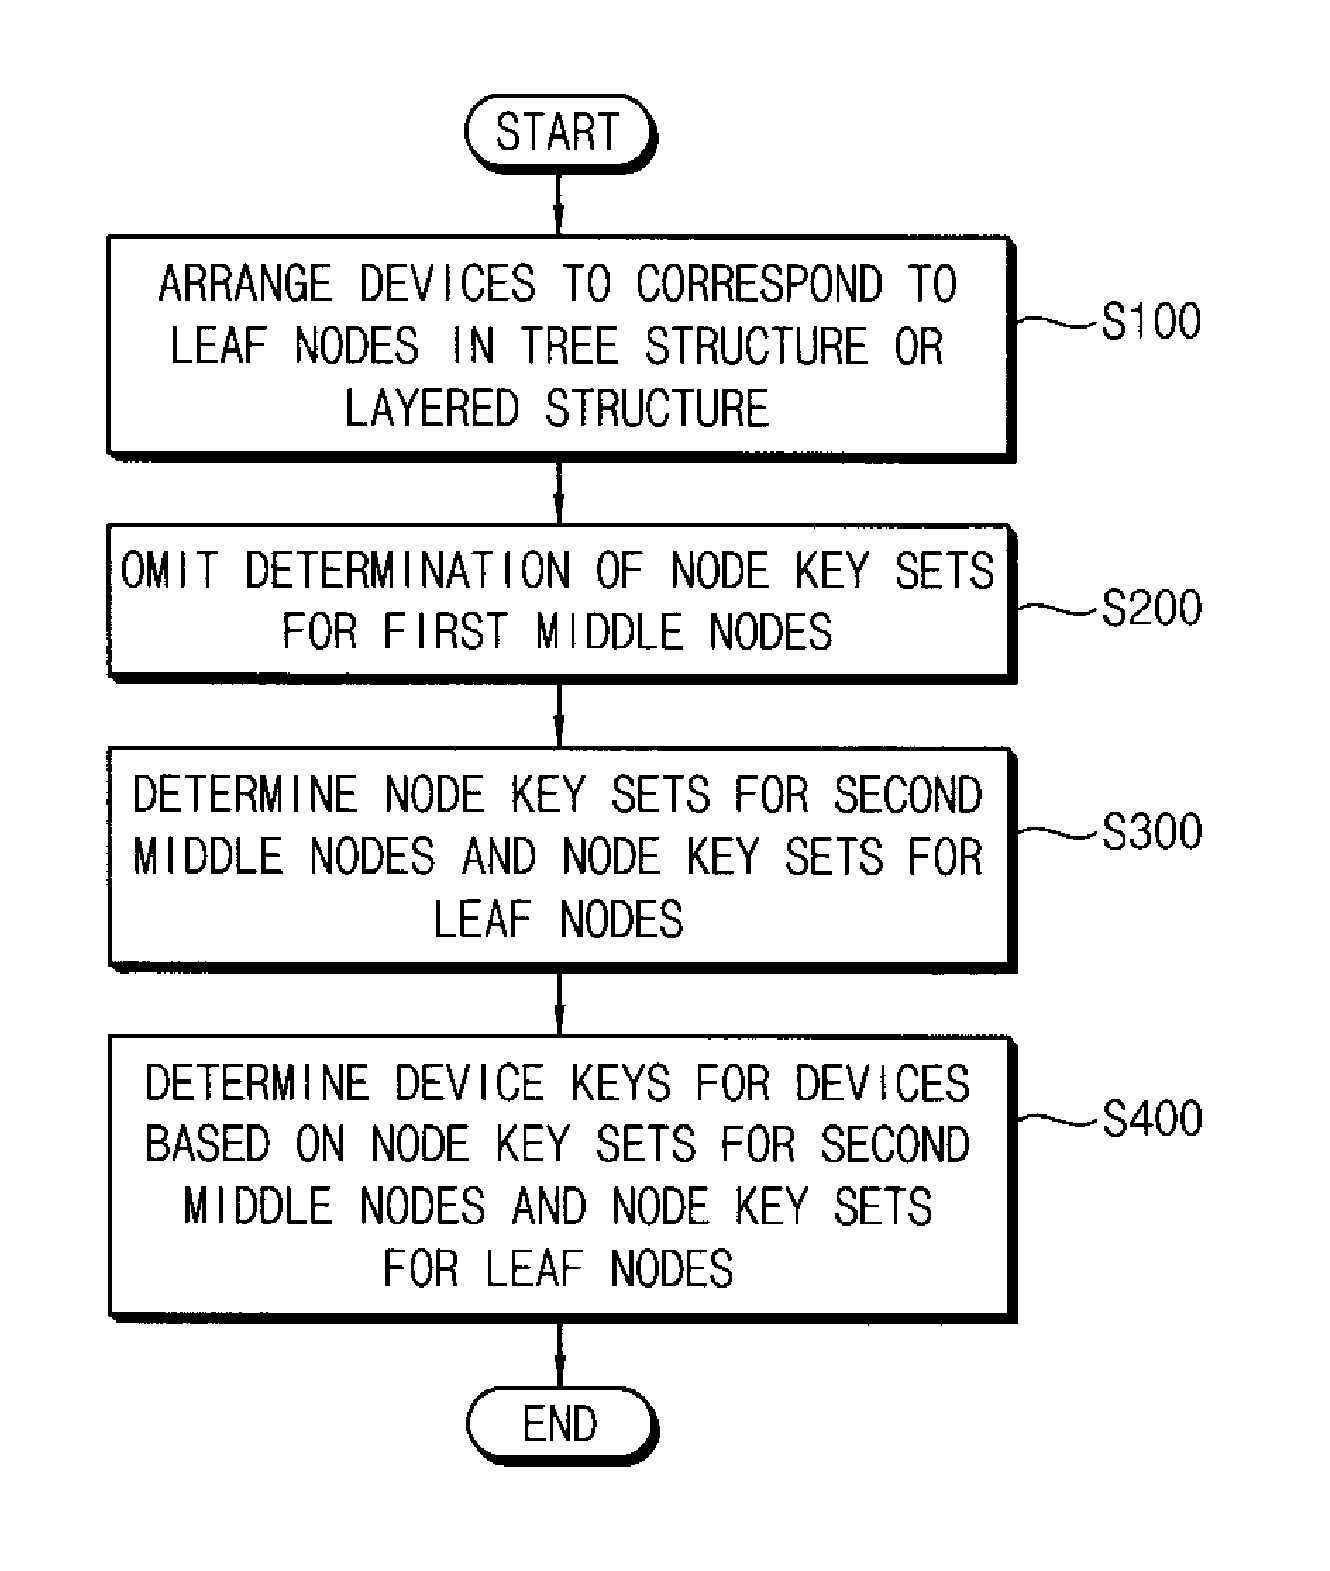 Management of encryption keys for broadcast encryption and transmission of messages using broadcast encryption